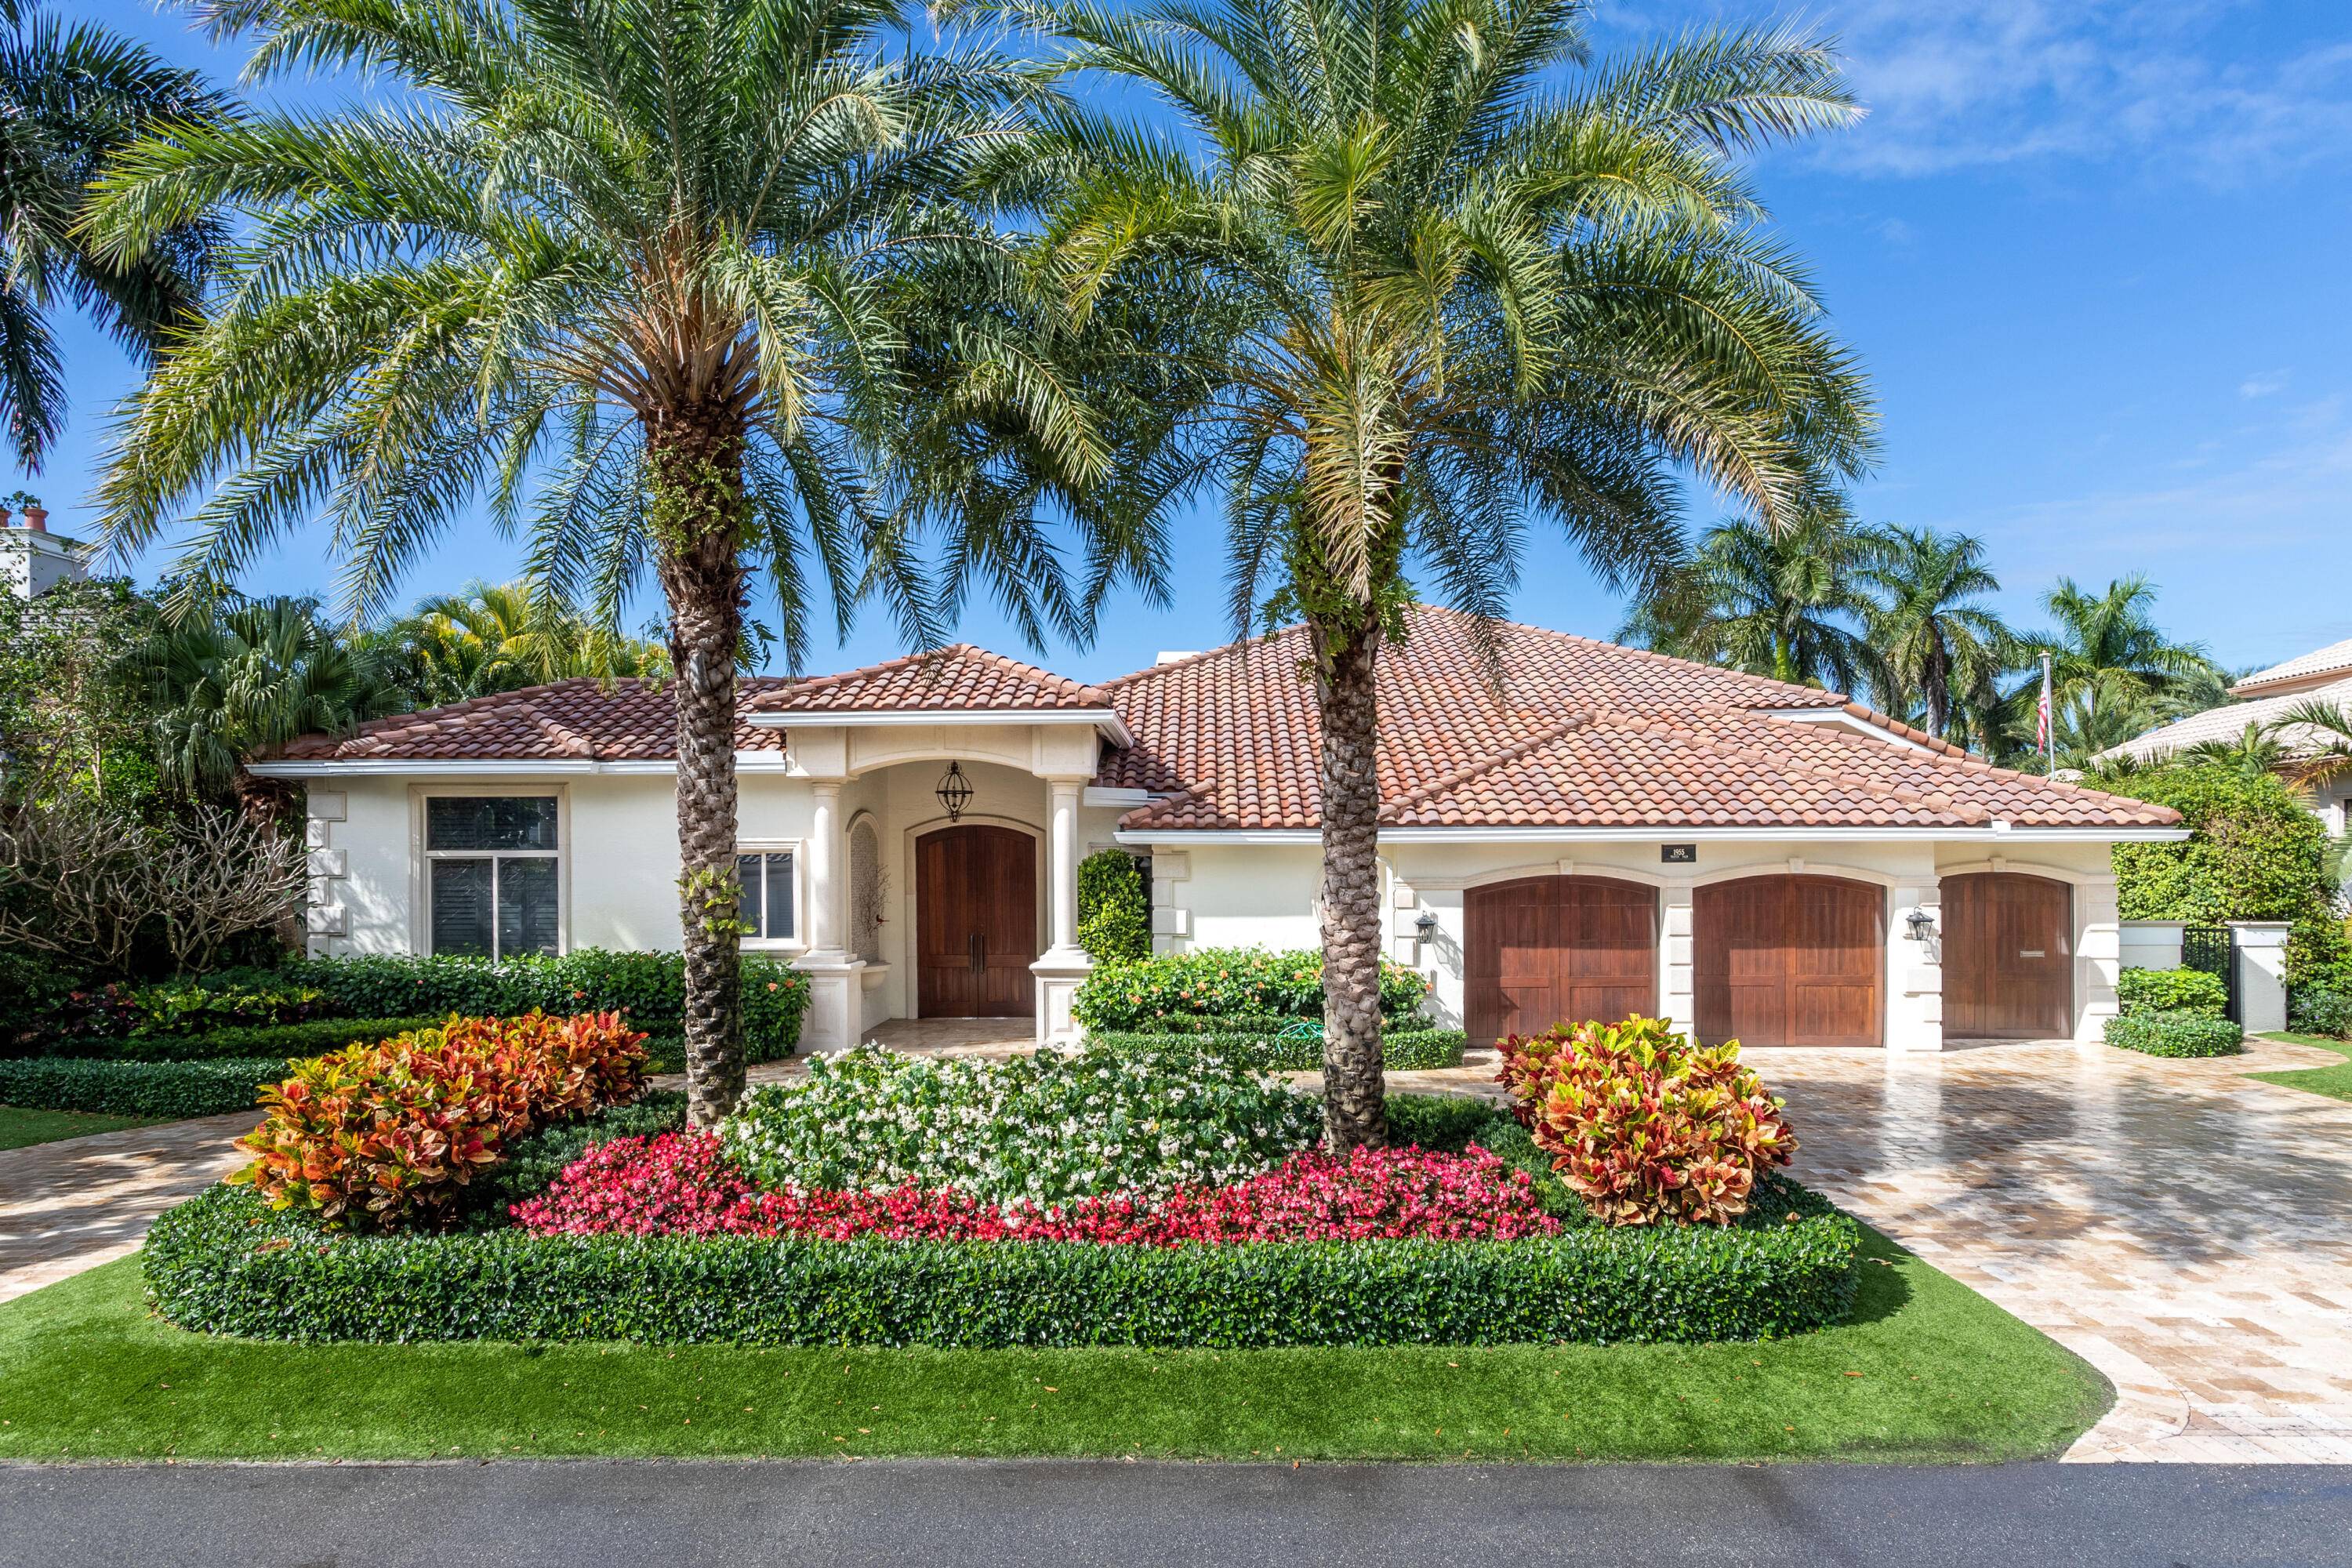 Beautiful Courtyard home with golf views overlooking the 12th fairway of a Jack Nicklaus design Signature Golf Course.